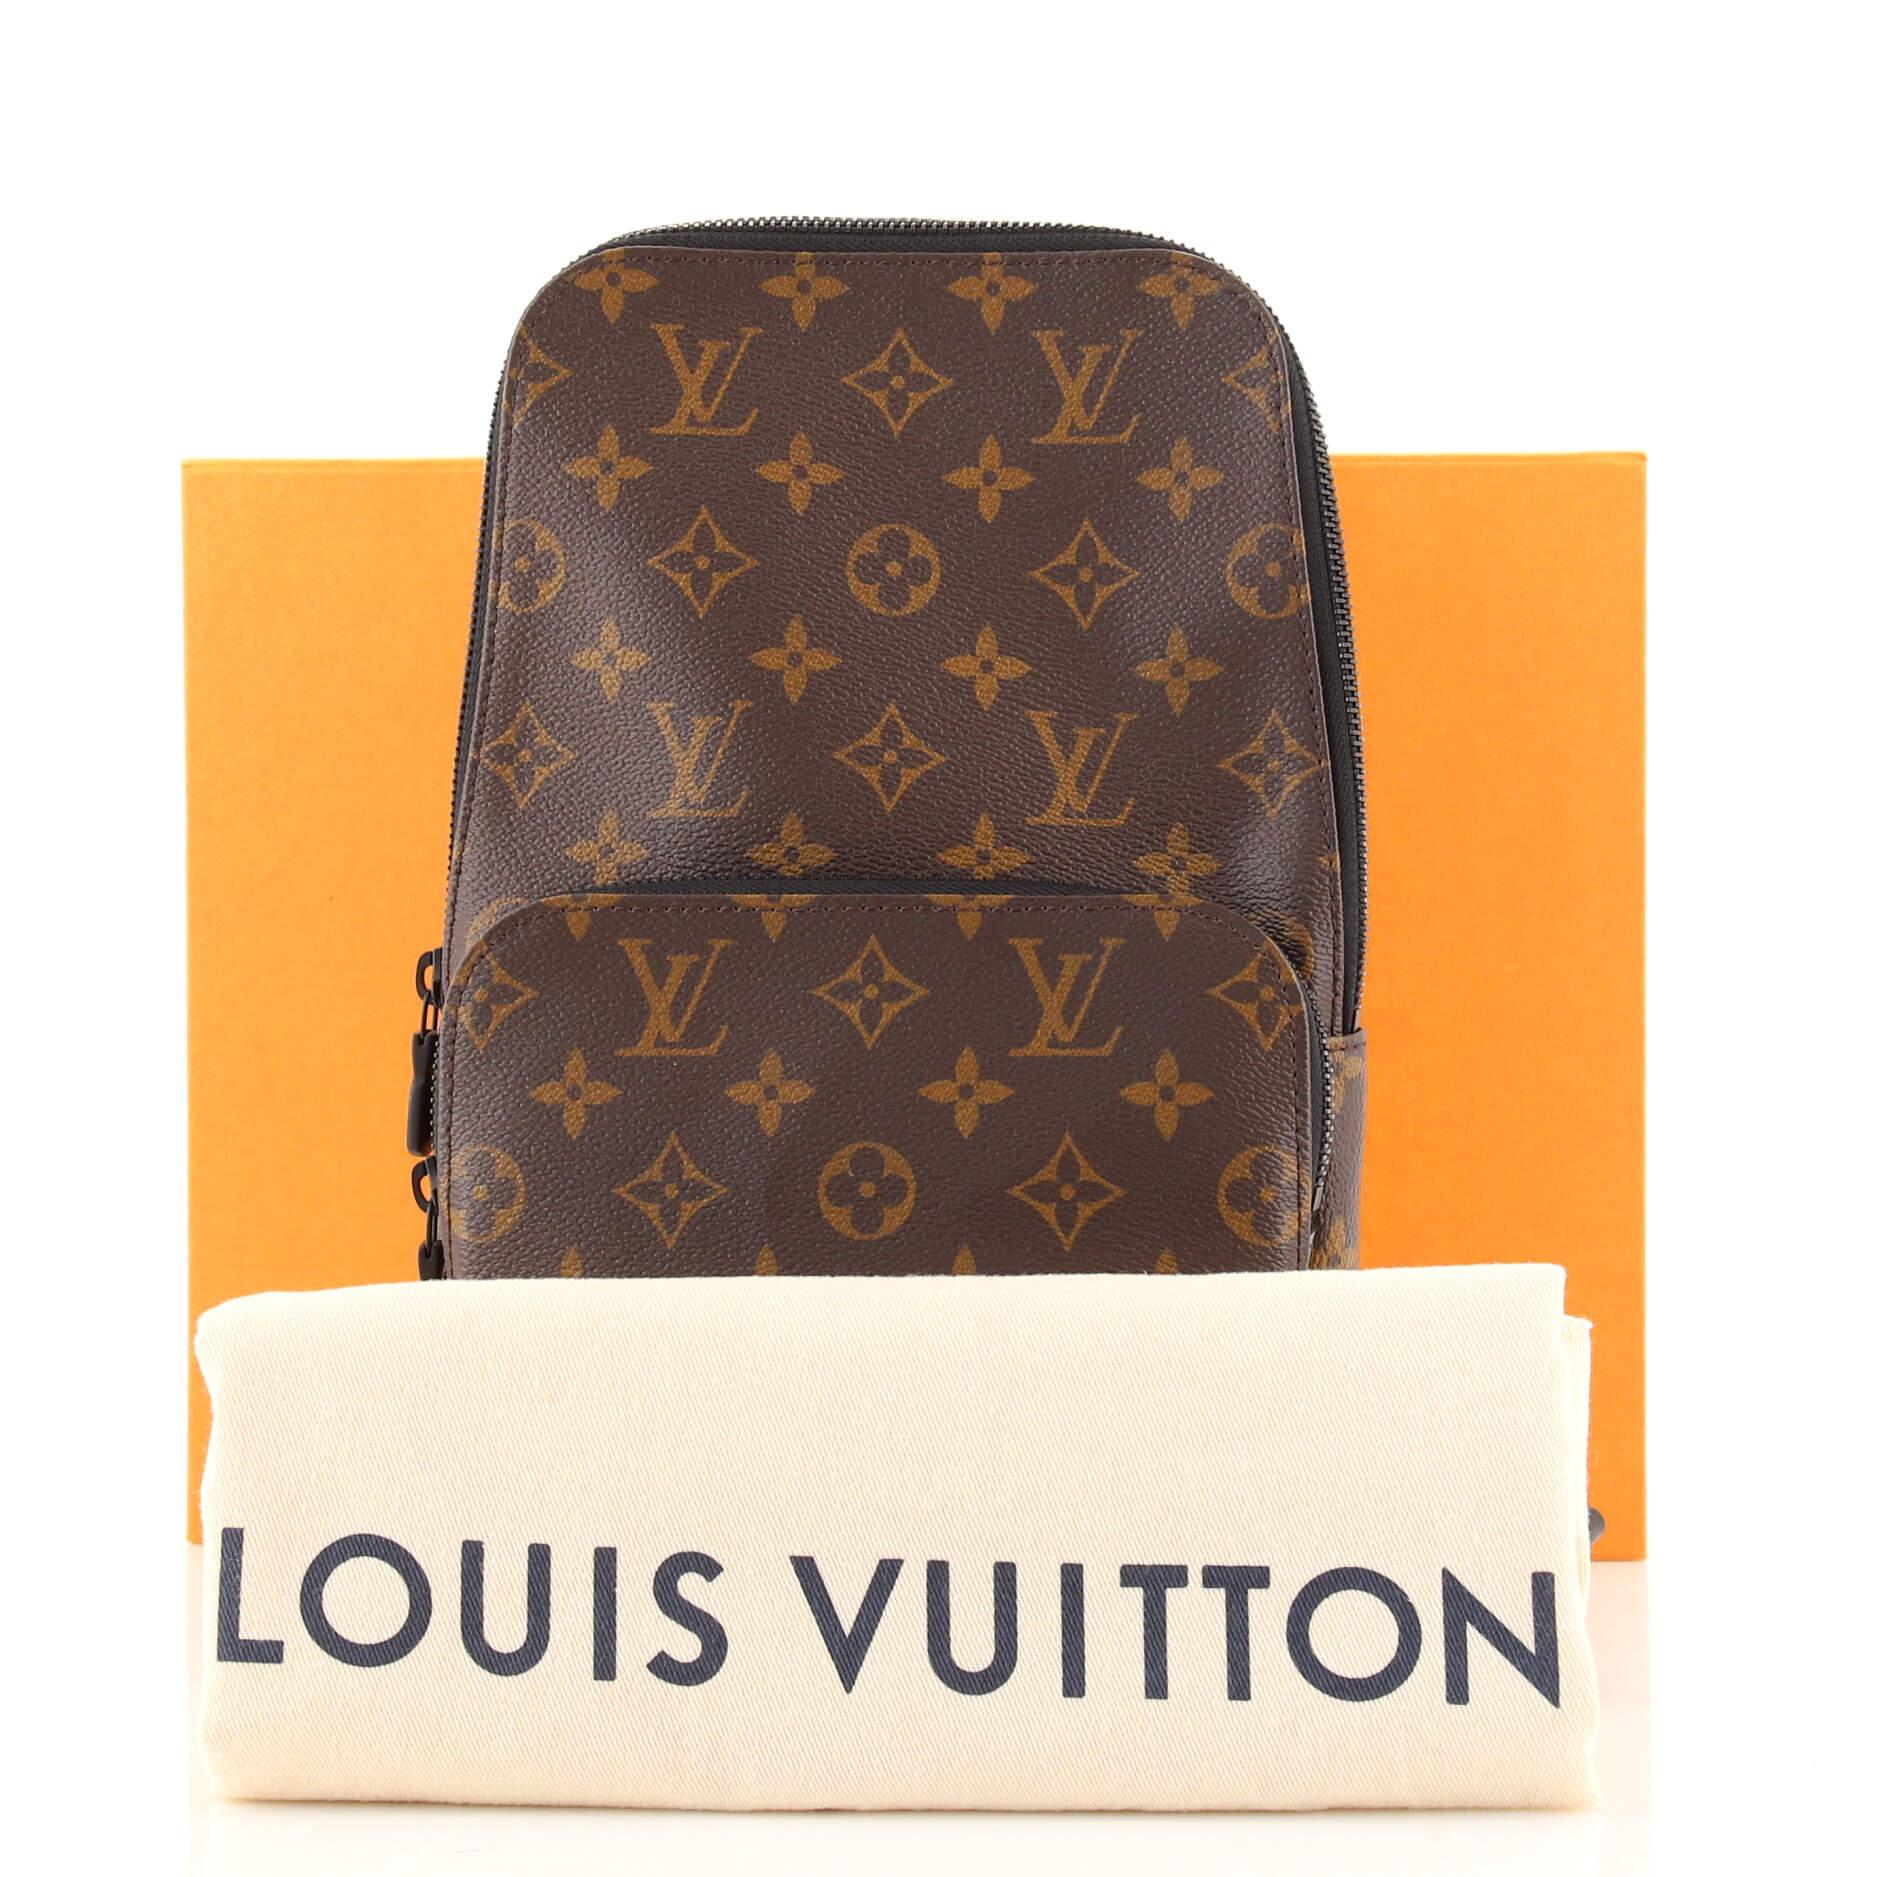 Hi! I just purchased my first LV bag from the website! And i just check it  and cant find the date code of the bag. This is the avenue sling bag in